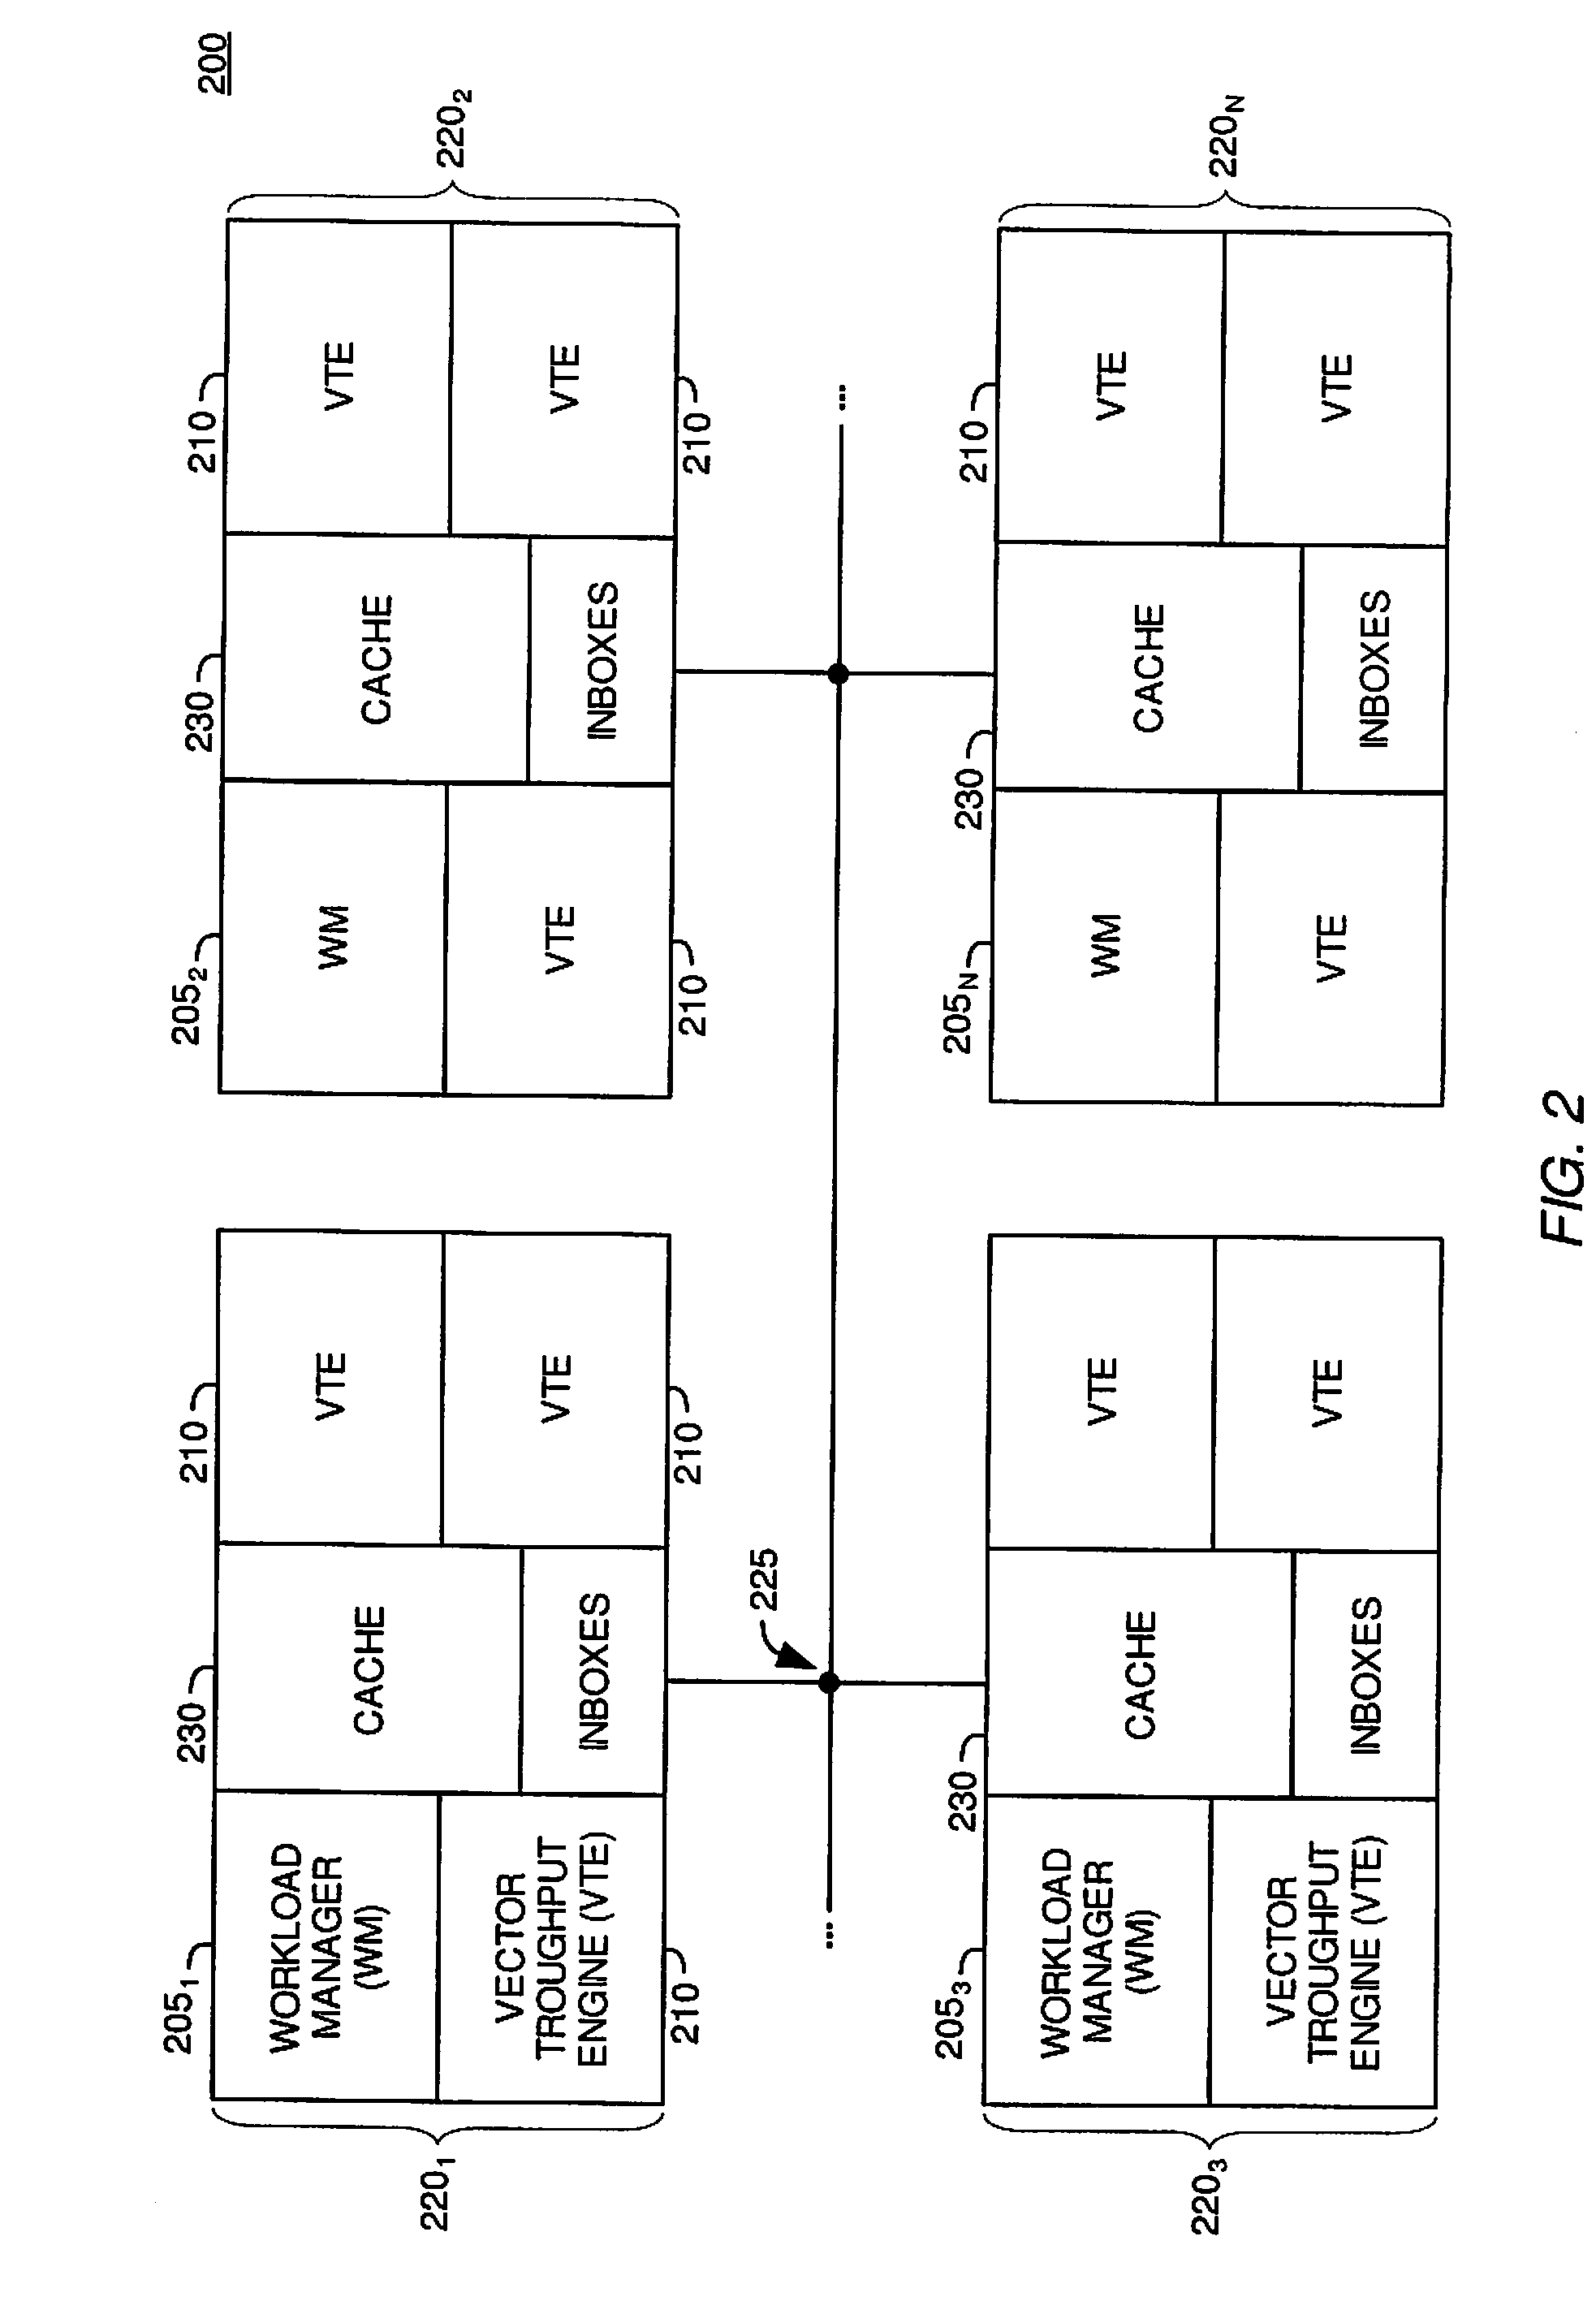 Integrated Acceleration Data Structure for Physics and Ray Tracing Workload